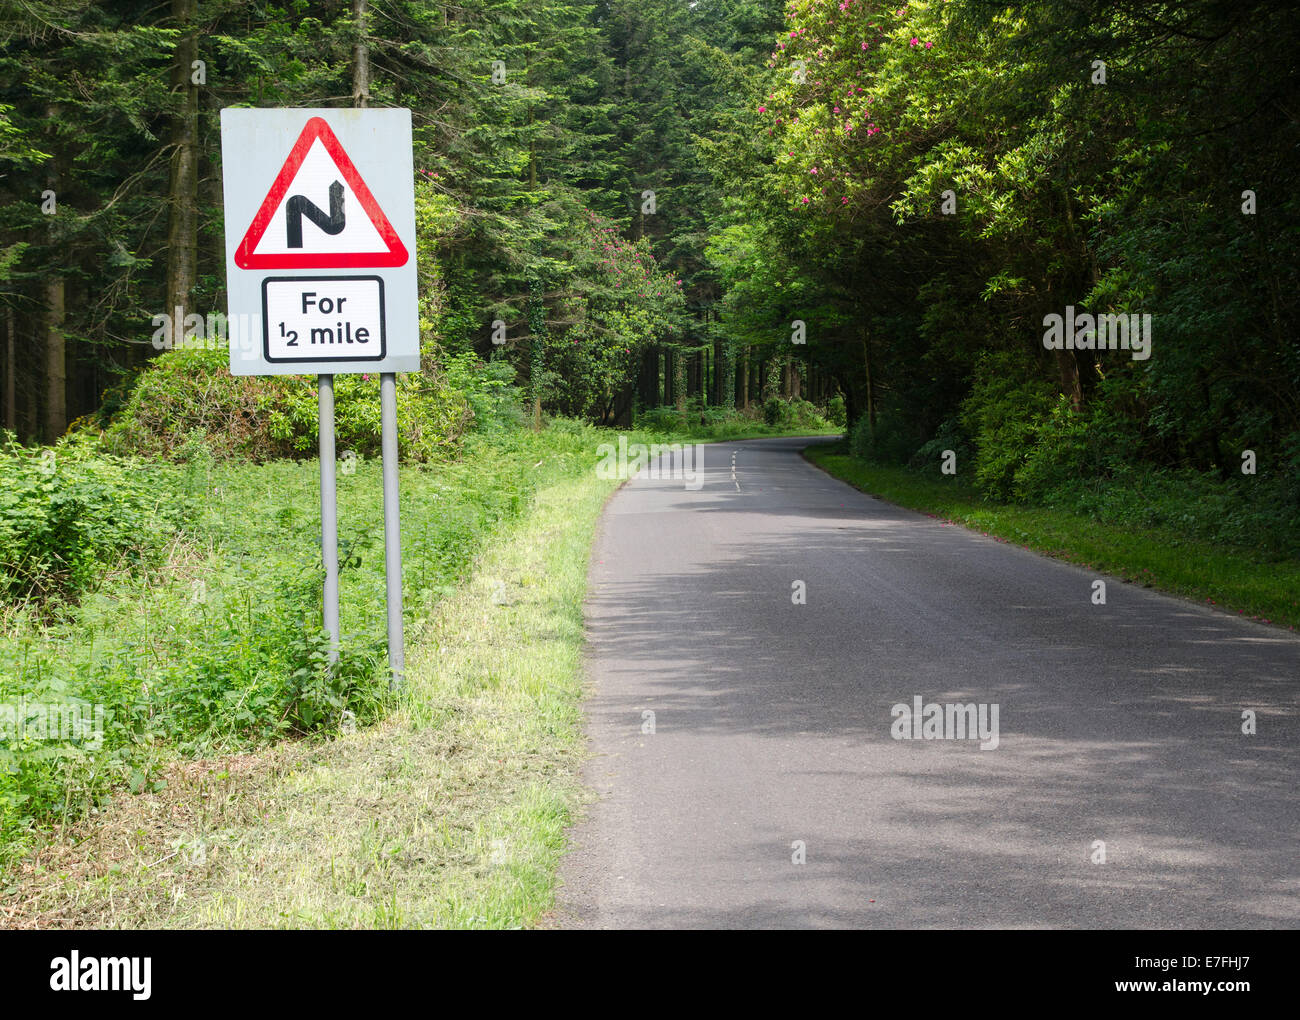 Bend in road warning sign Stock Photo